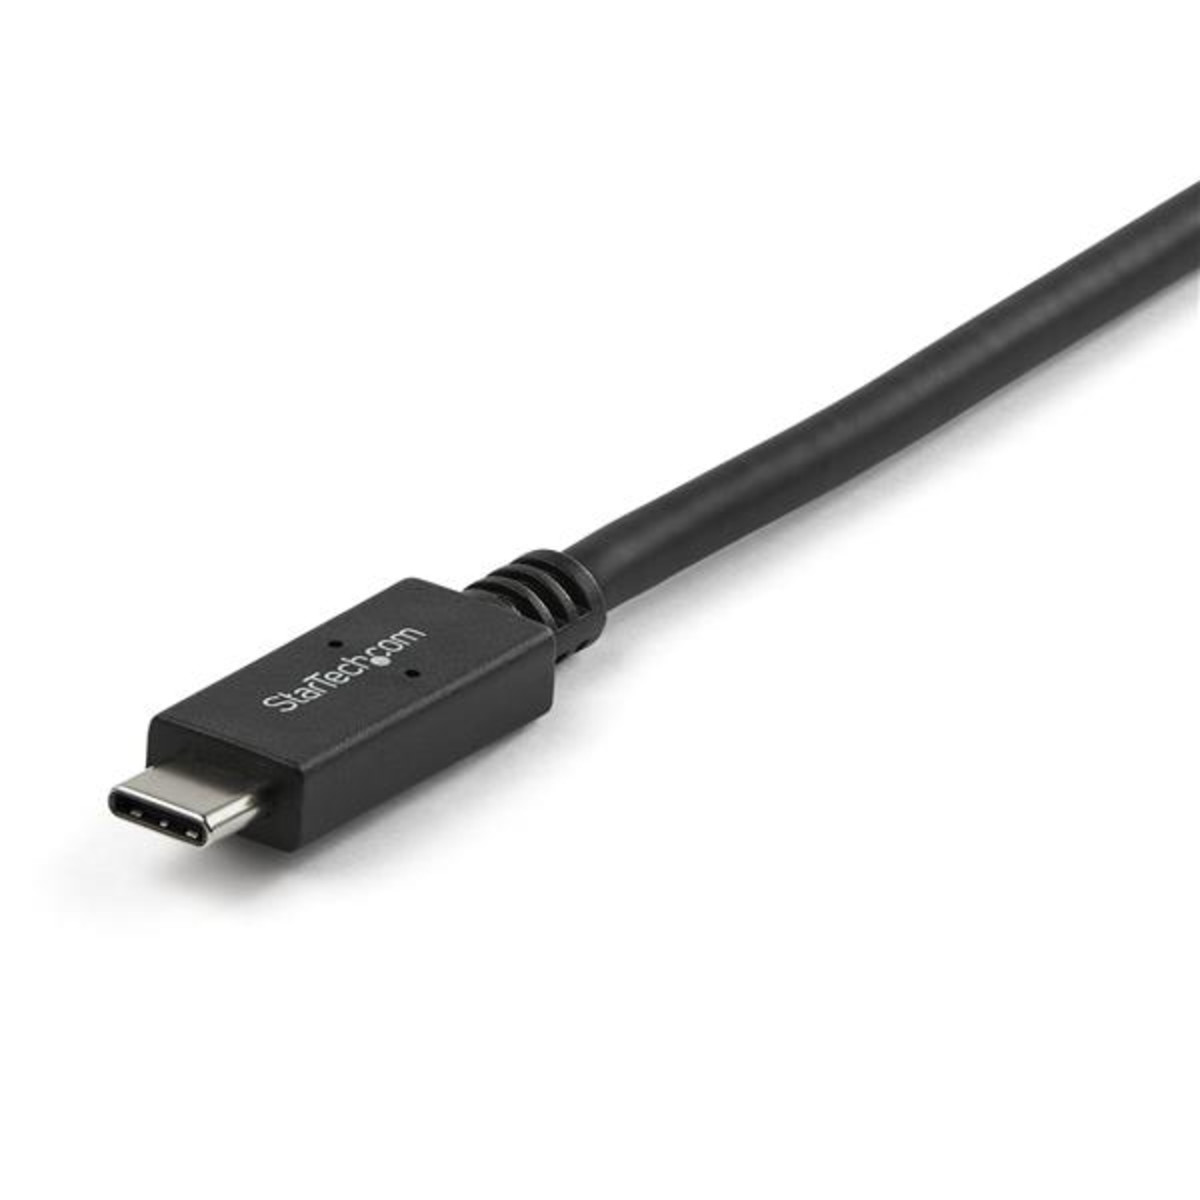 USB 3.1 USB-C to USB-A cable - 1m (3ft)